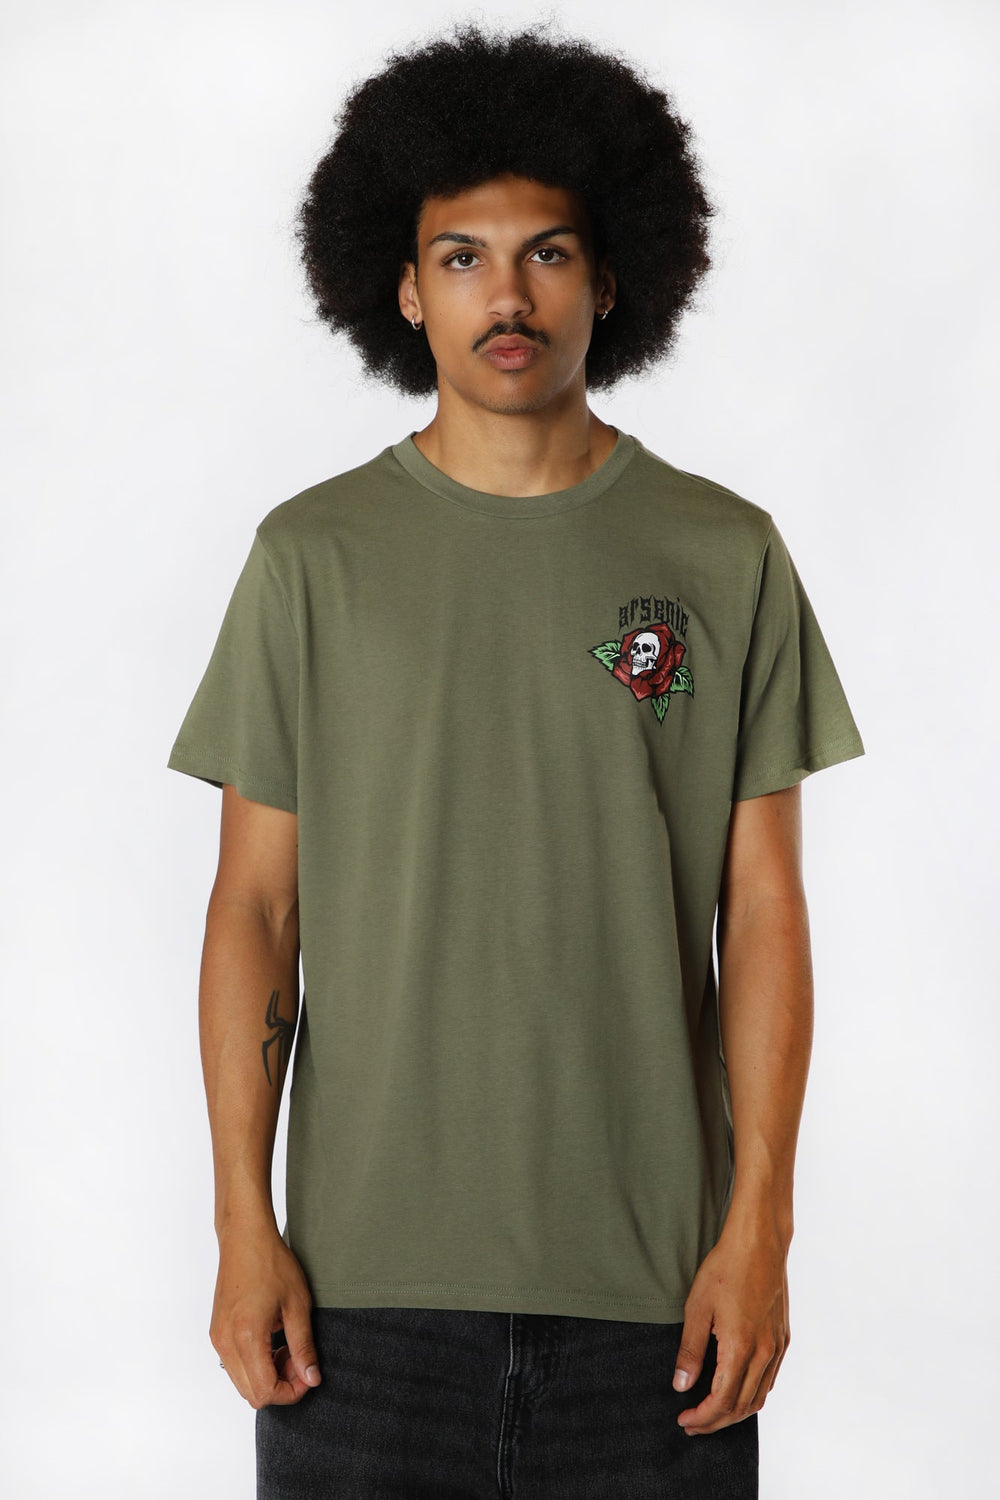 T-Shirt Cut Your Losses Arsenic Homme Vert fonce